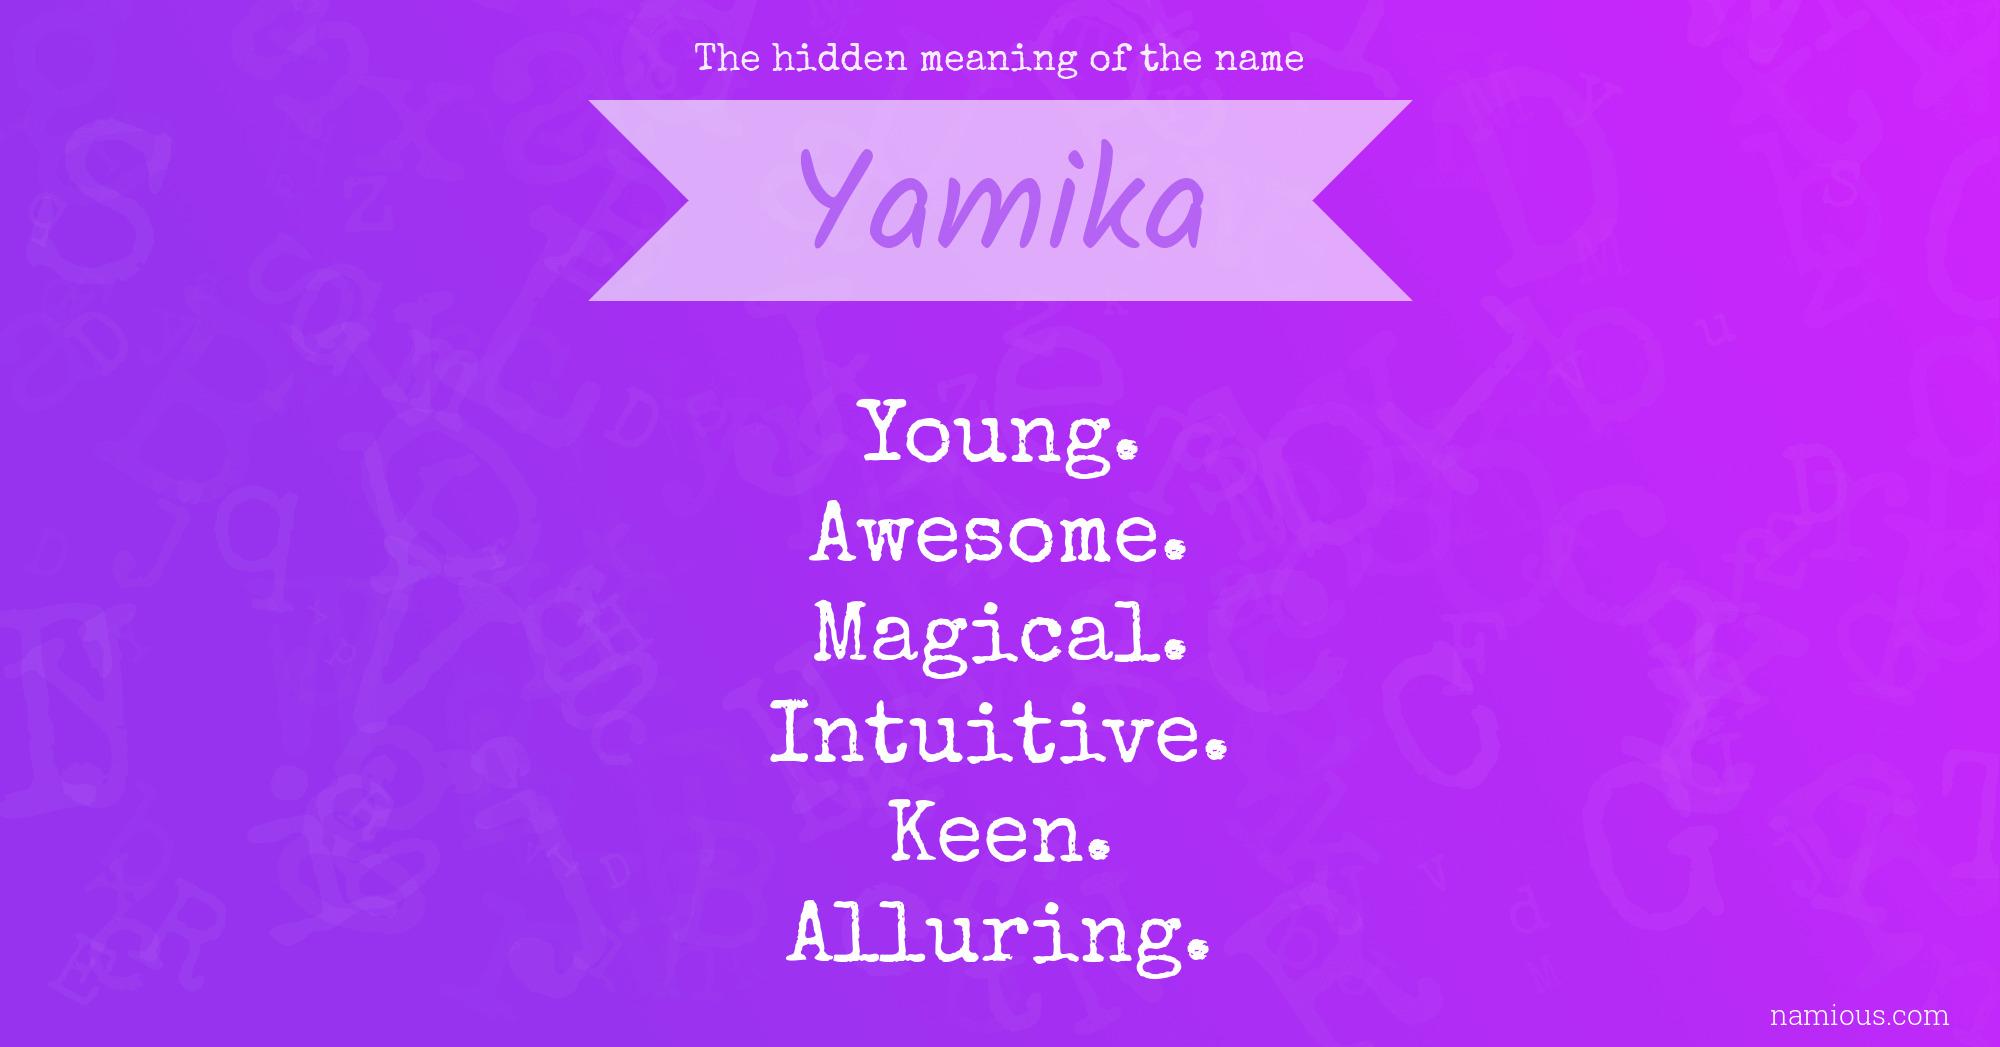 The hidden meaning of the name Yamika